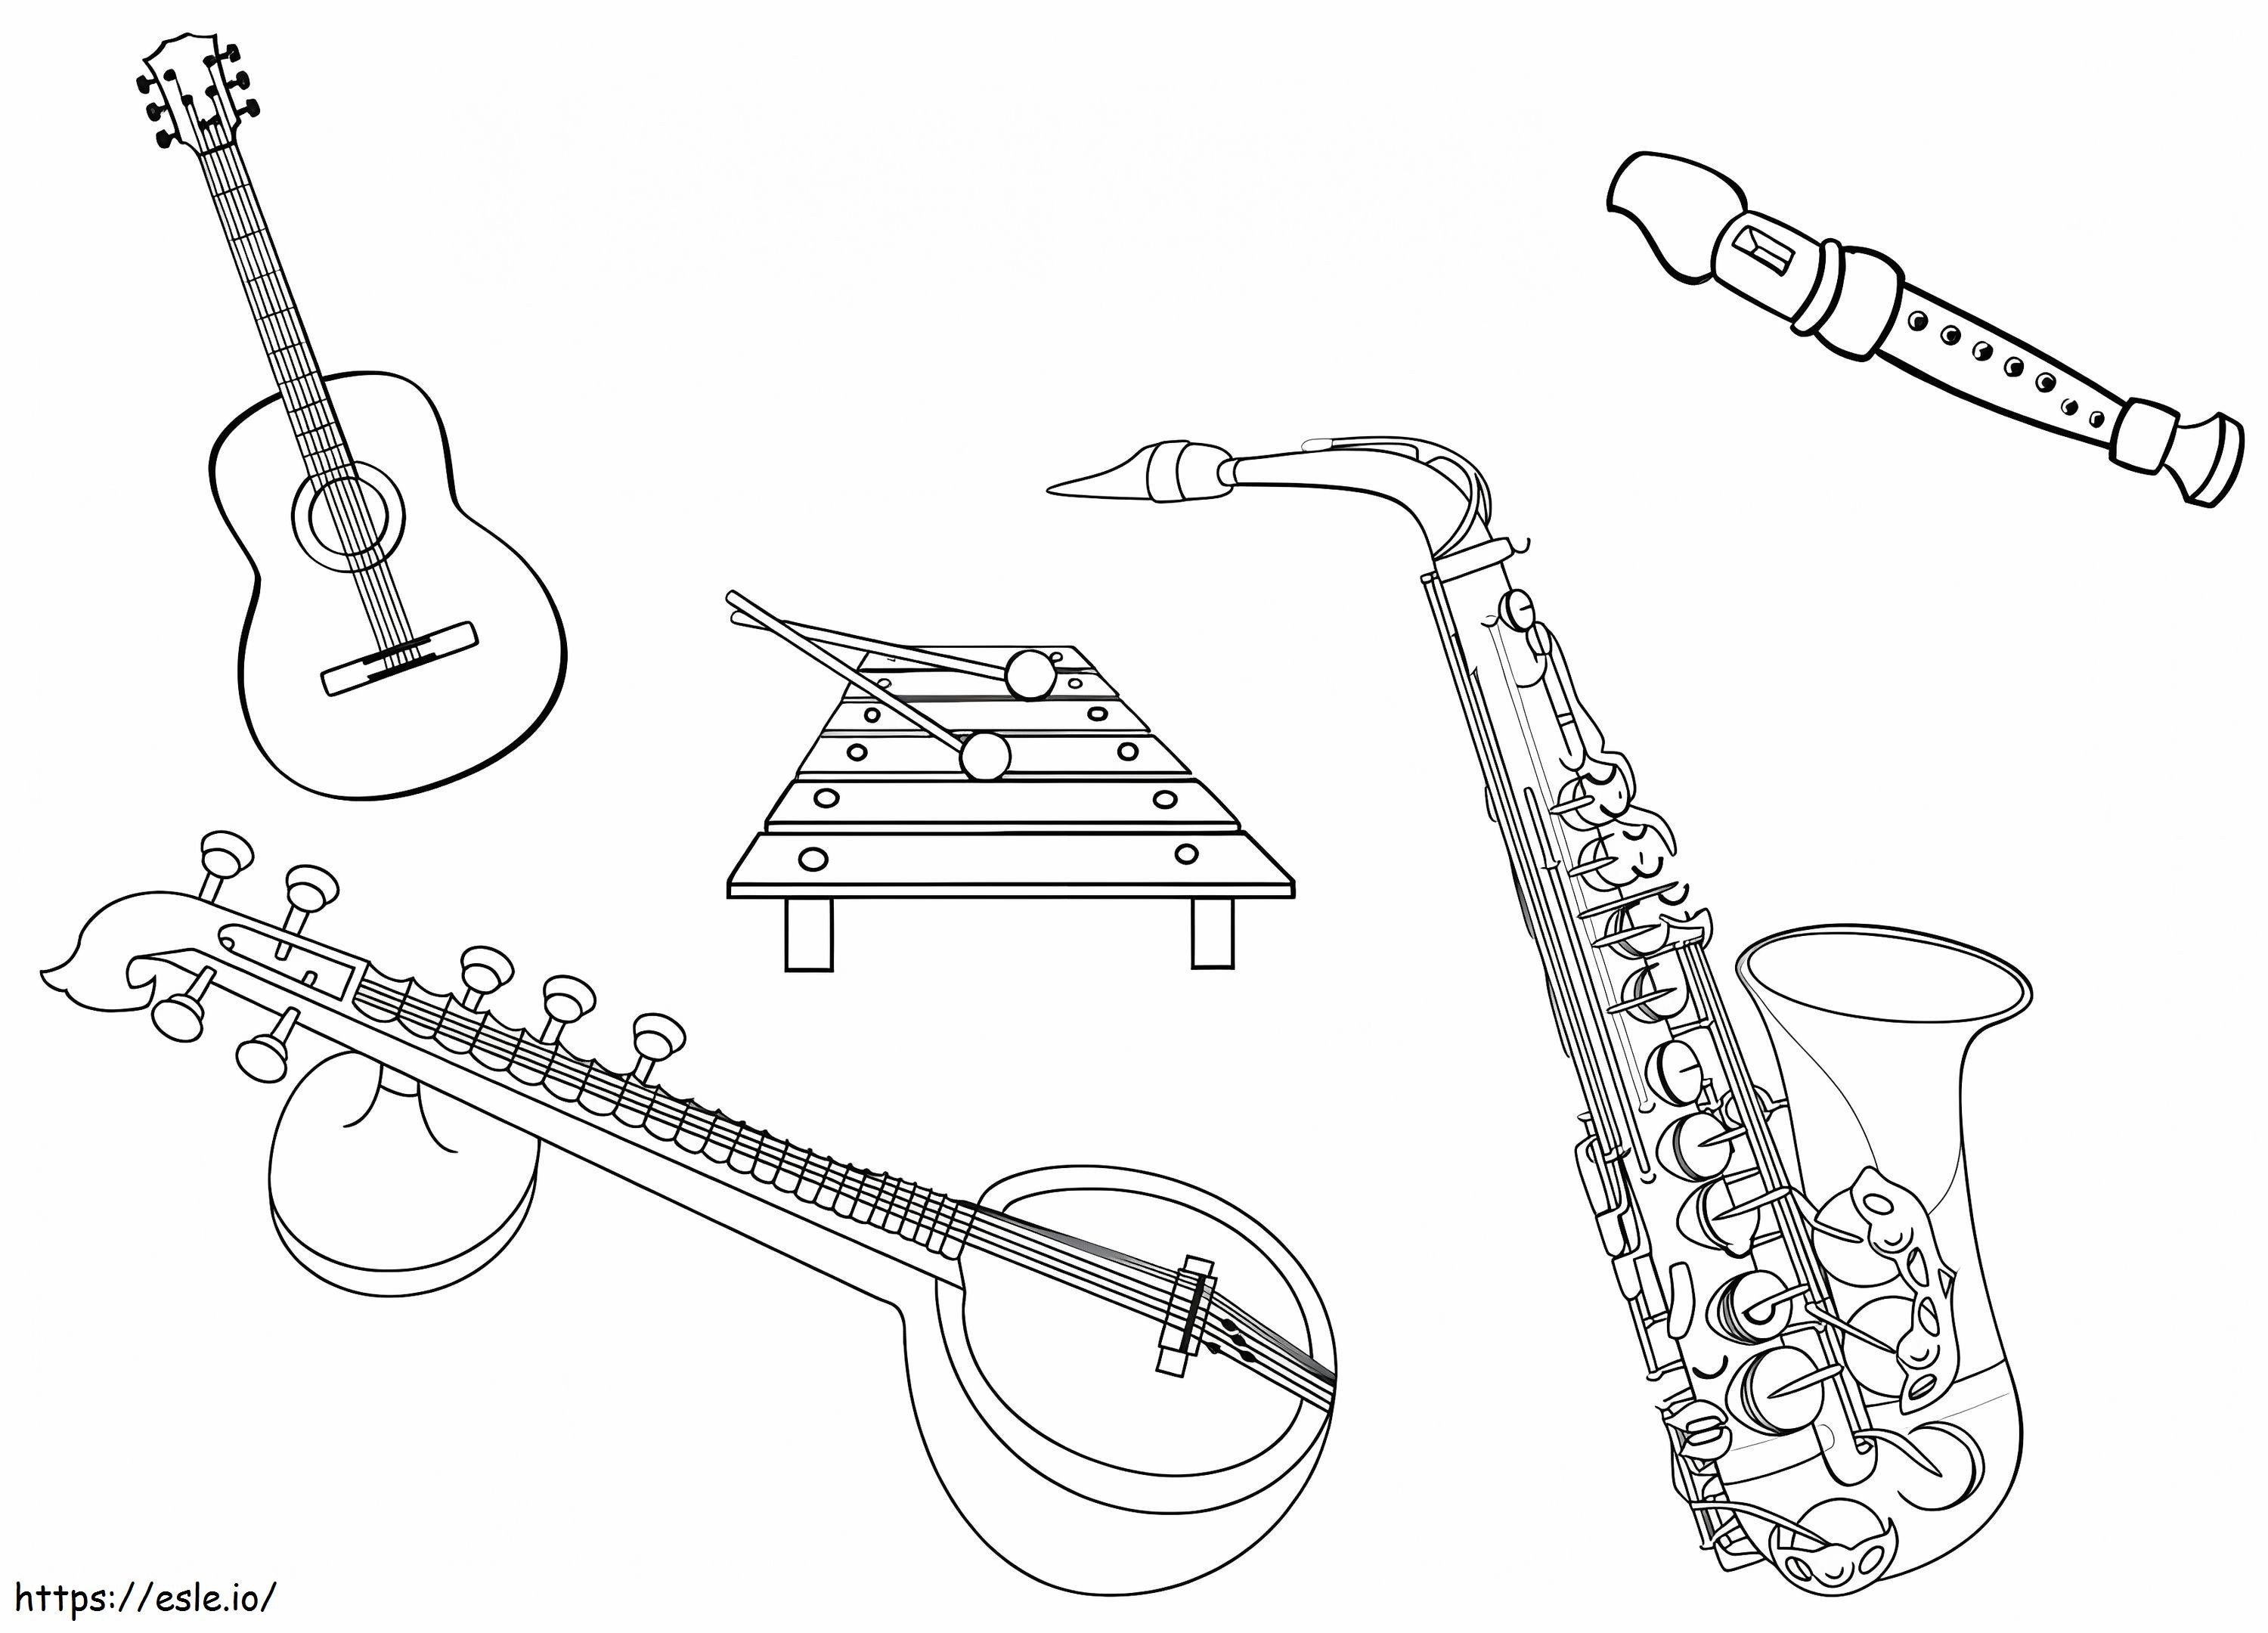 Awesome Music Instrument coloring page